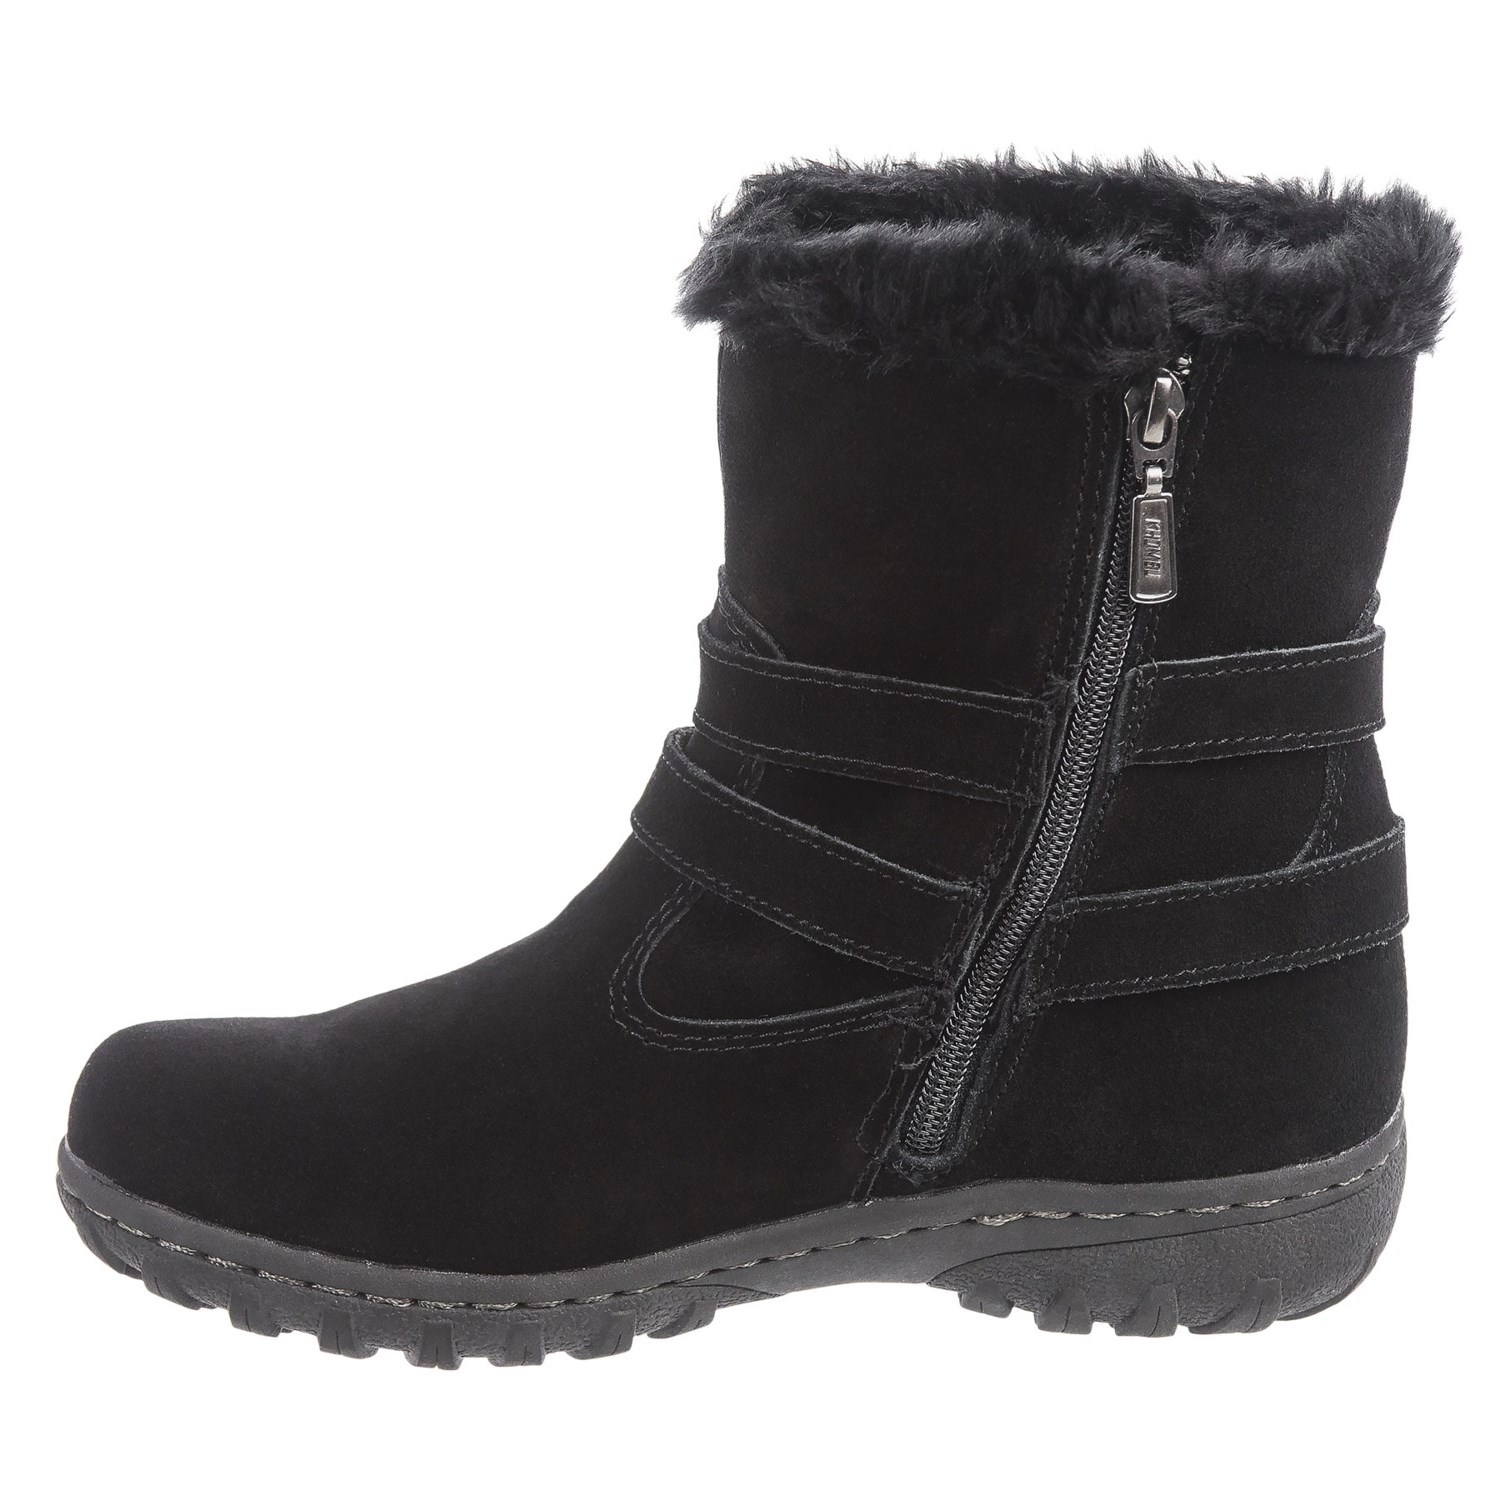 Khombu Kelly Snow Boots (For Women) - Save 77%